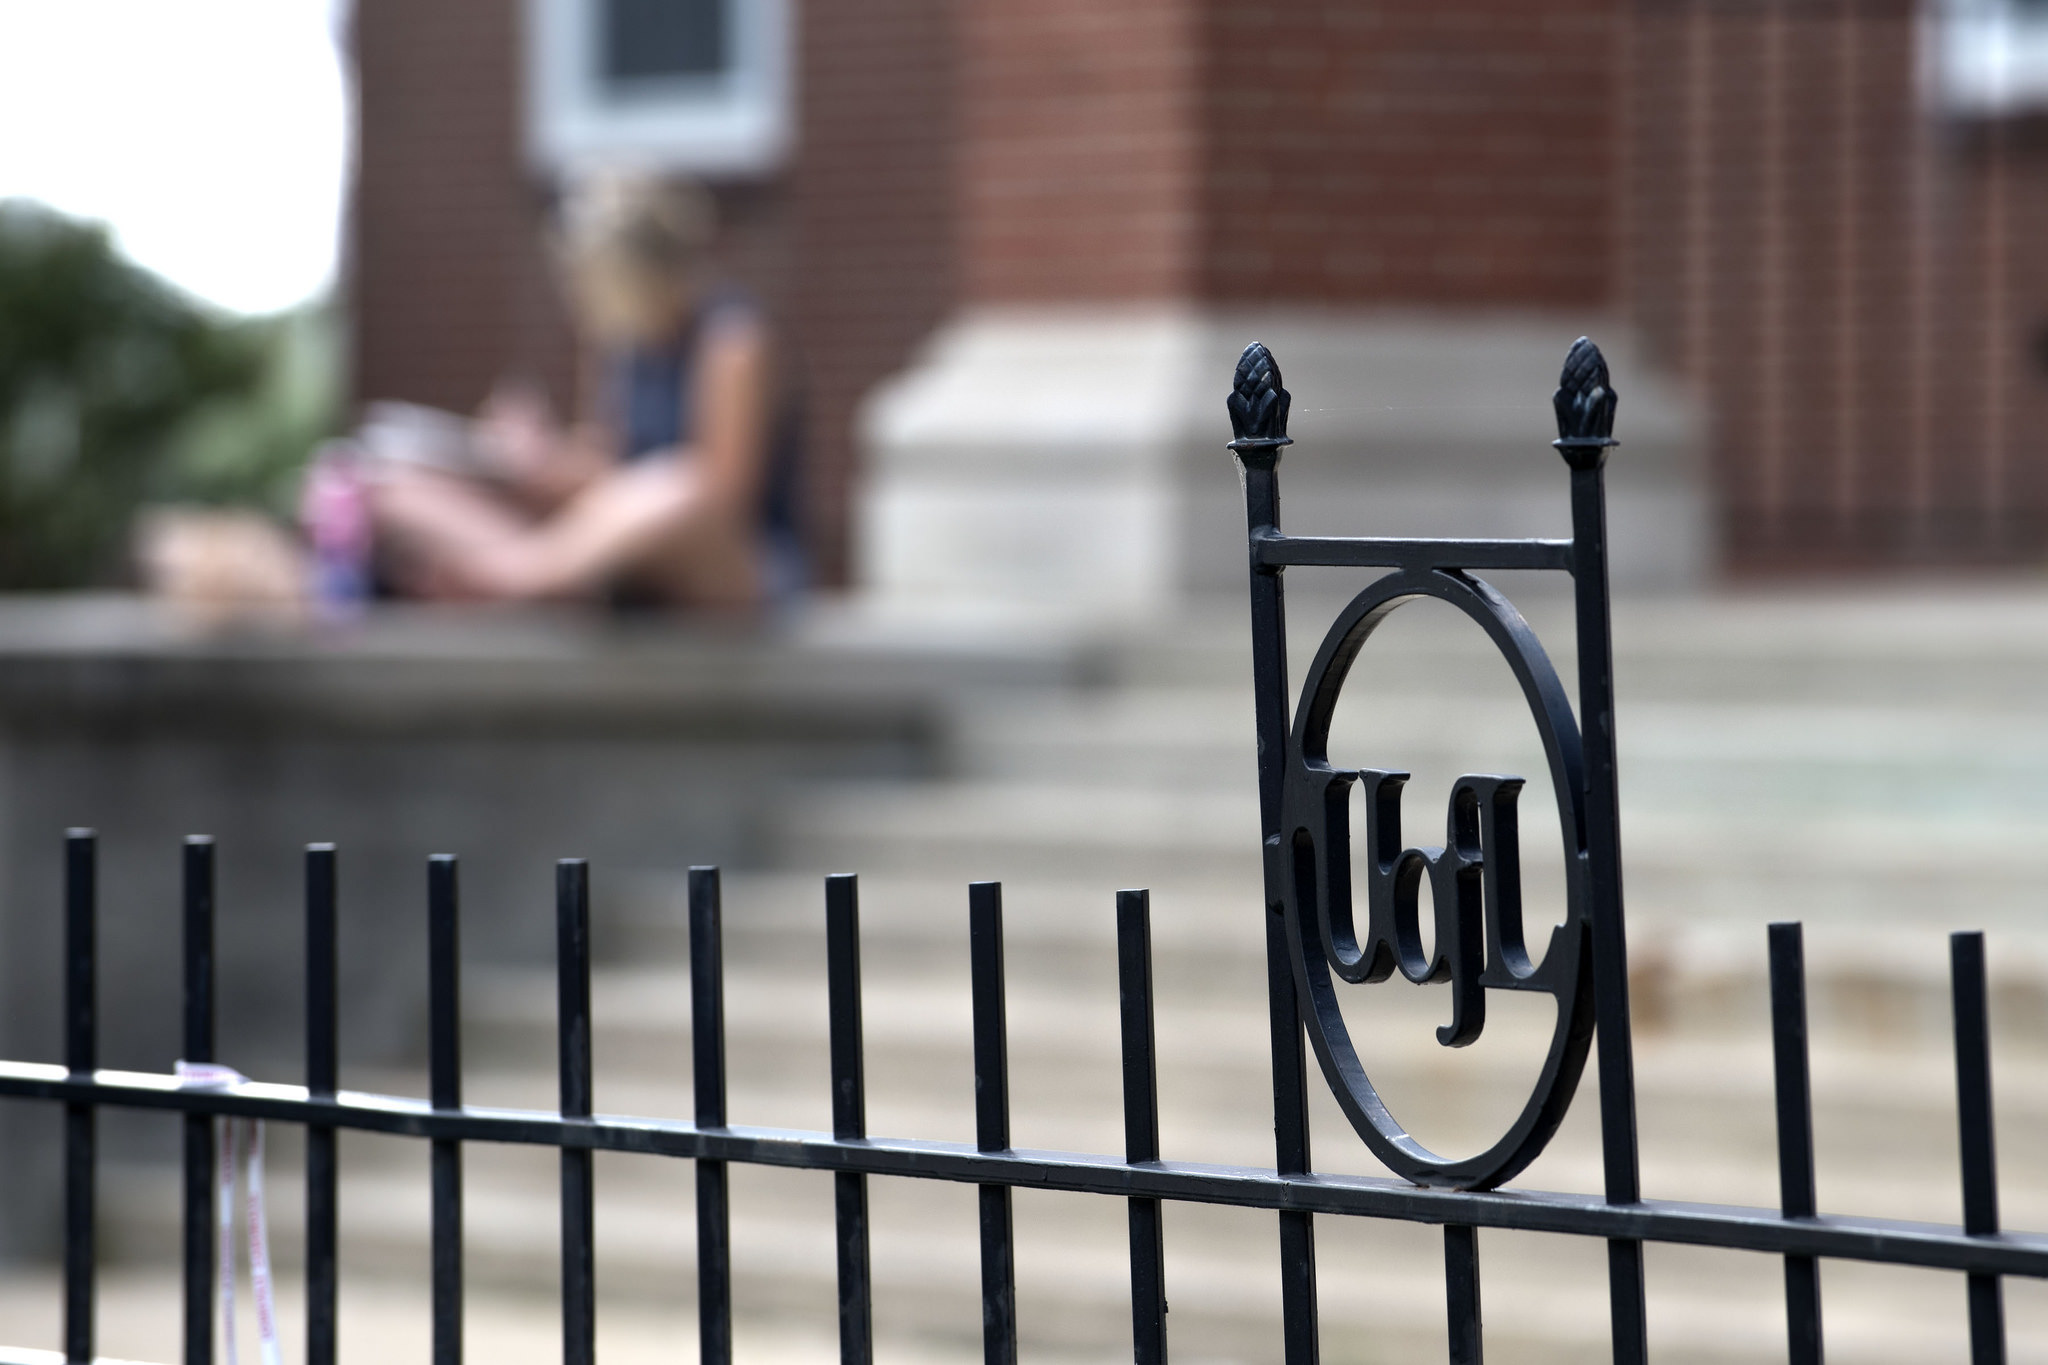 As part of the 21st Century University Initiative, UofL was seeking to enhance up to three programs that show potential to address critical or emerging issues of national significance and that will help define the university as a national leader in these fields.